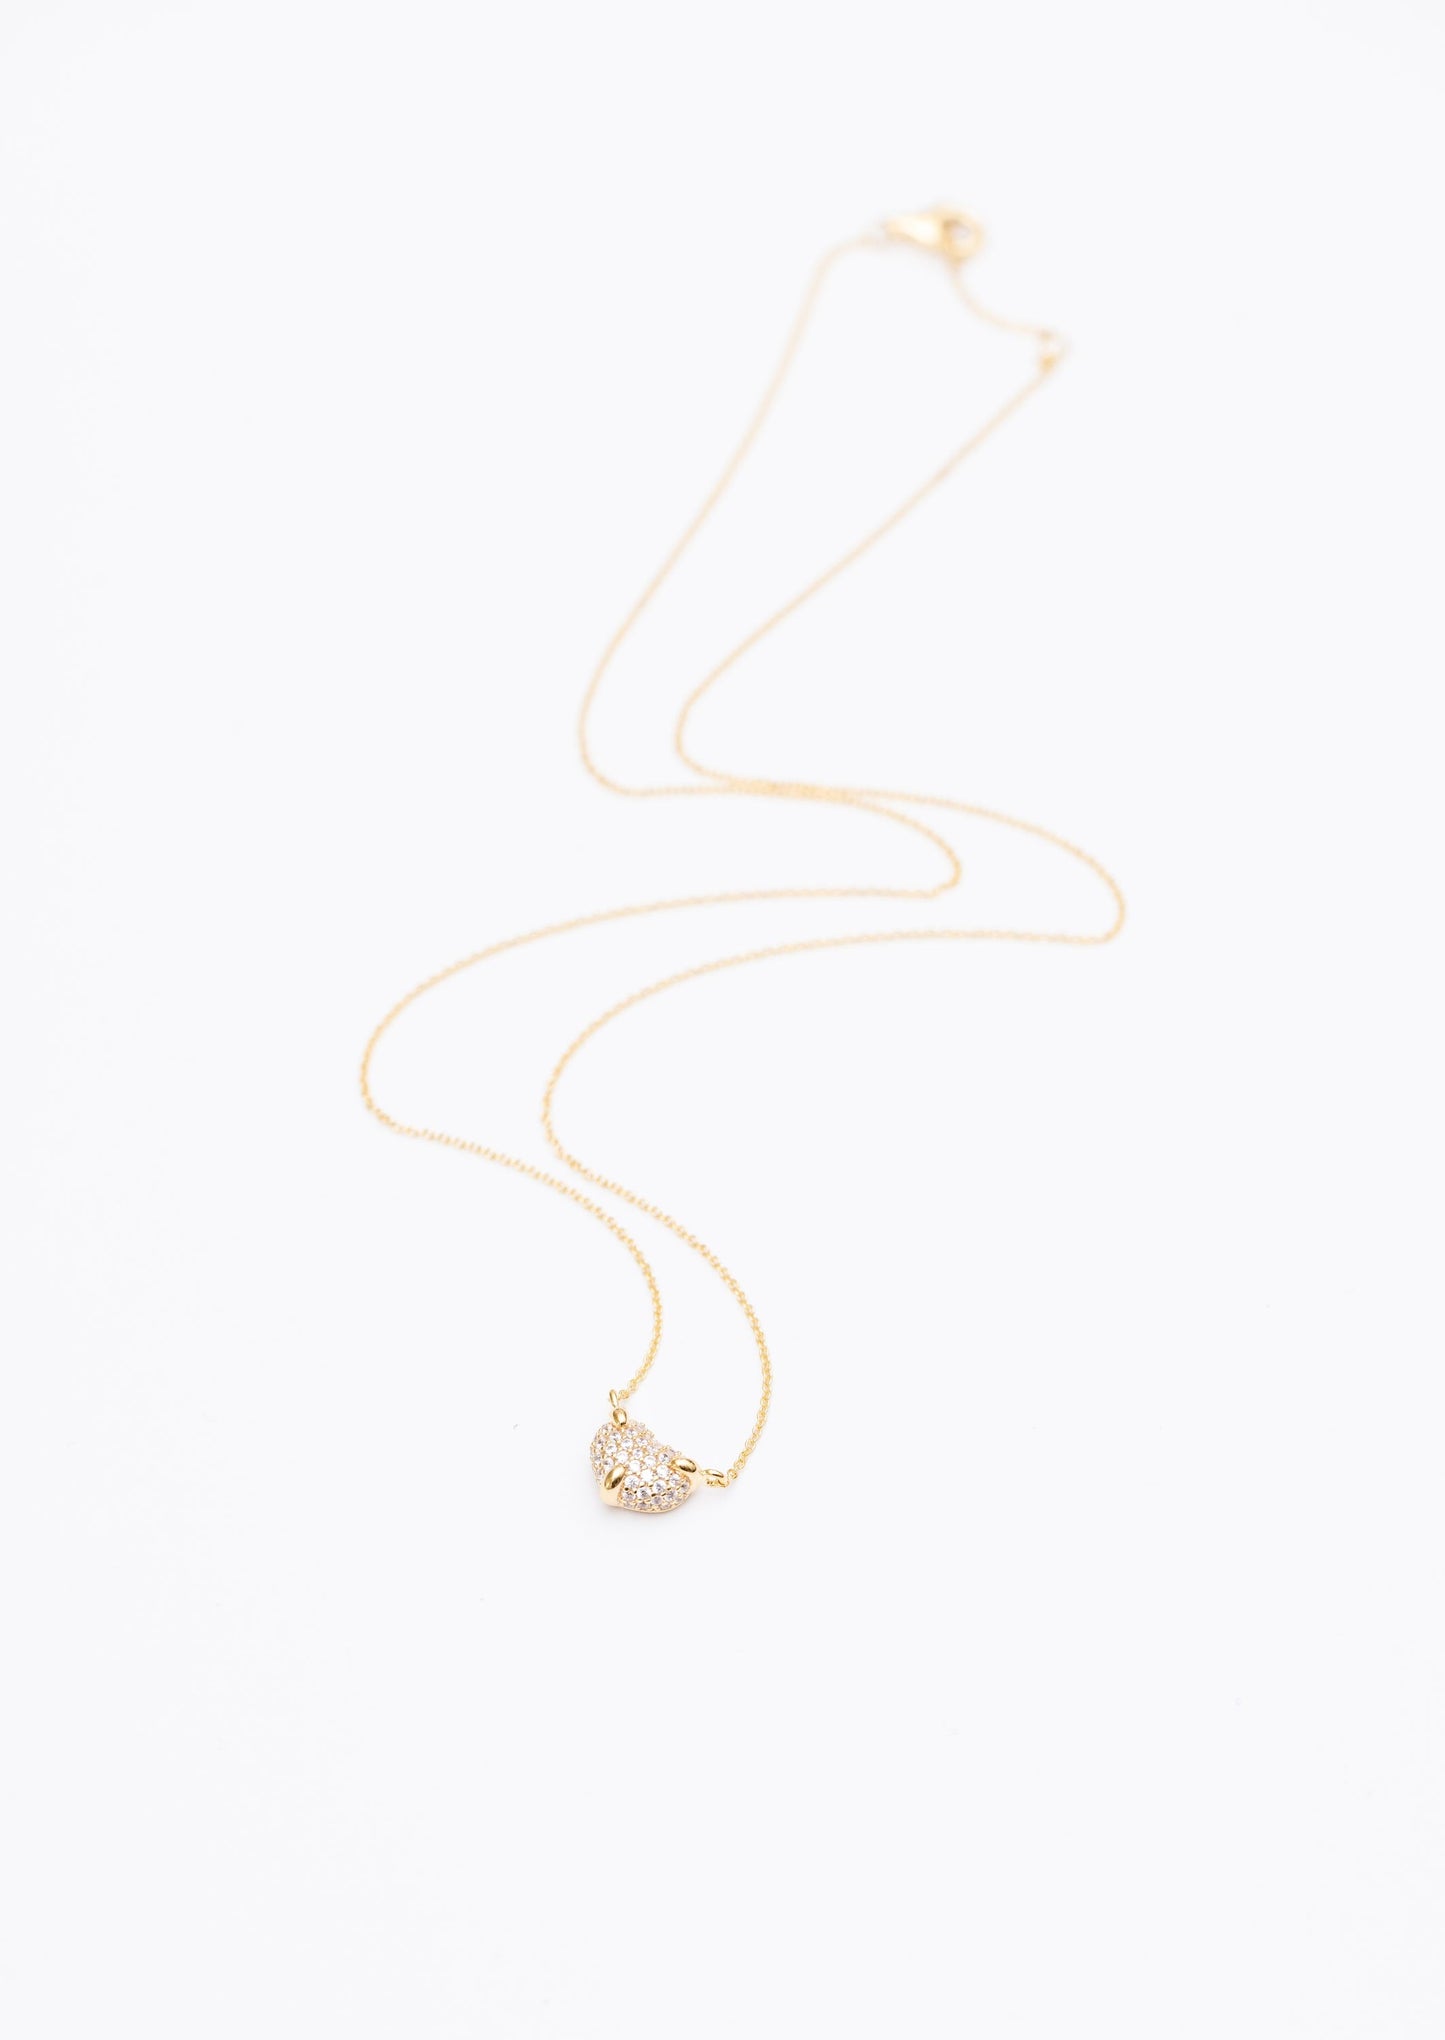 The Love Mama necklace - gold plated